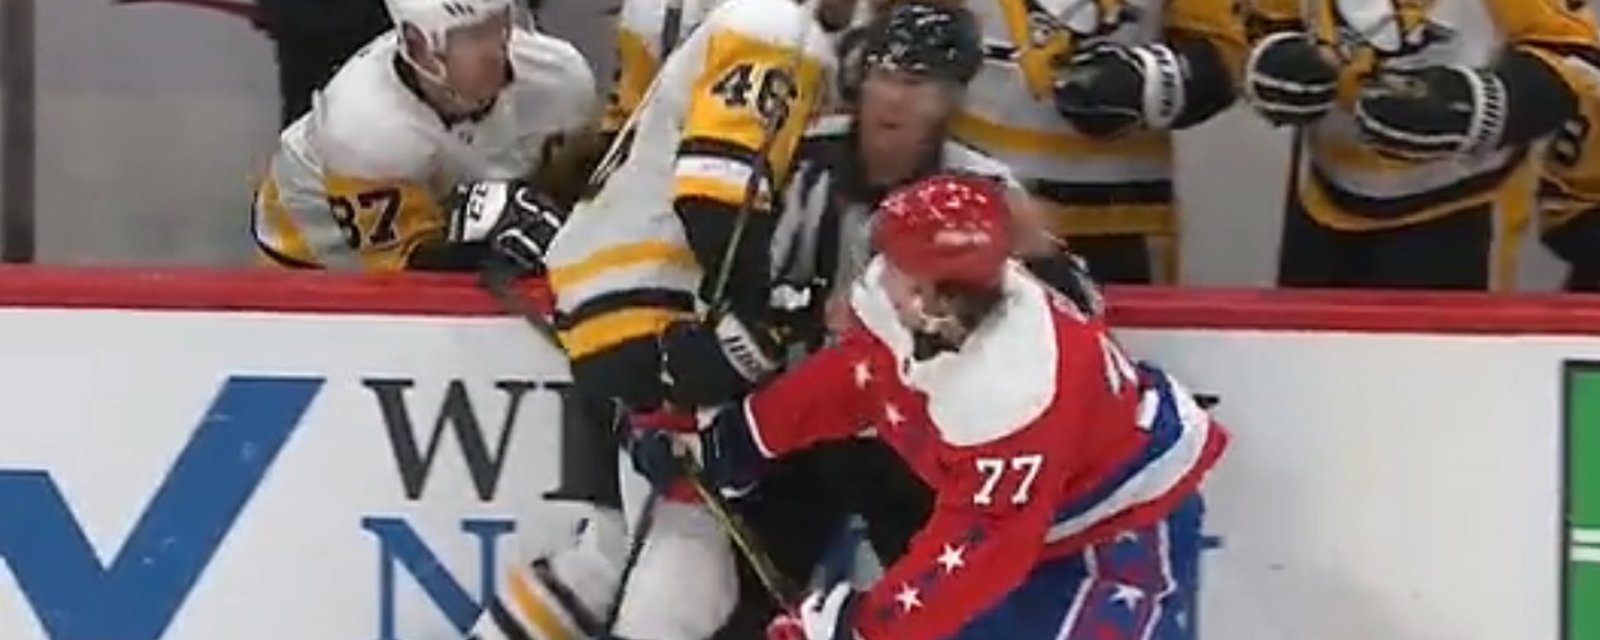 Crosby gets a penalty while on the bench after getting into with T.J. Oshie.